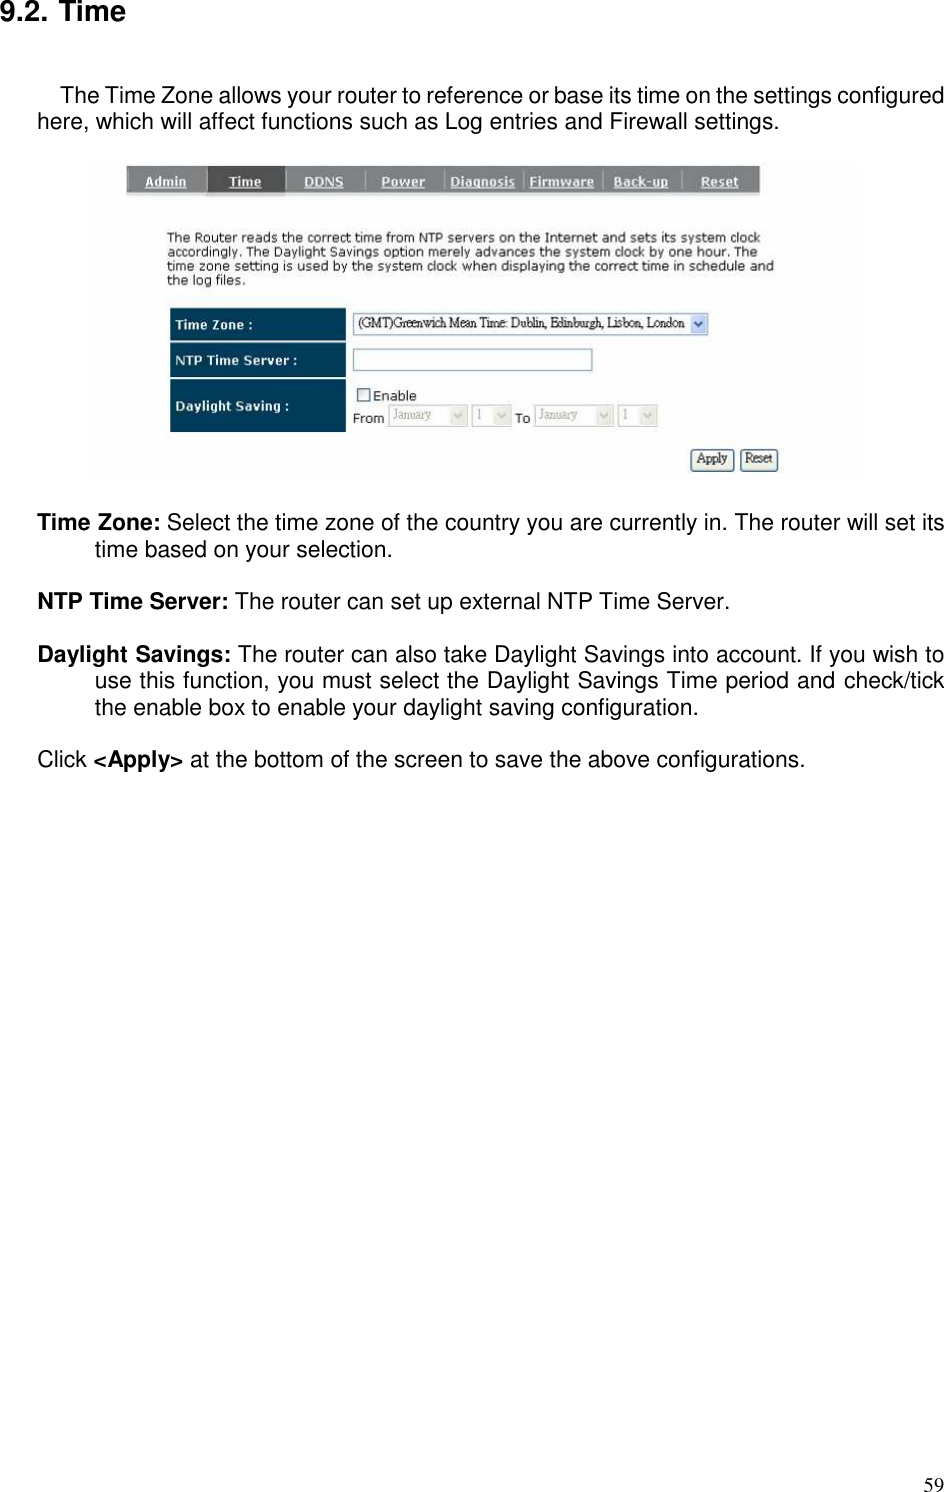   59 9.2. Time  The Time Zone allows your router to reference or base its time on the settings configured here, which will affect functions such as Log entries and Firewall settings.    Time Zone: Select the time zone of the country you are currently in. The router will set its time based on your selection.    NTP Time Server: The router can set up external NTP Time Server.  Daylight Savings: The router can also take Daylight Savings into account. If you wish to use this function, you must select the Daylight Savings Time period and check/tick the enable box to enable your daylight saving configuration.  Click &lt;Apply&gt; at the bottom of the screen to save the above configurations. 